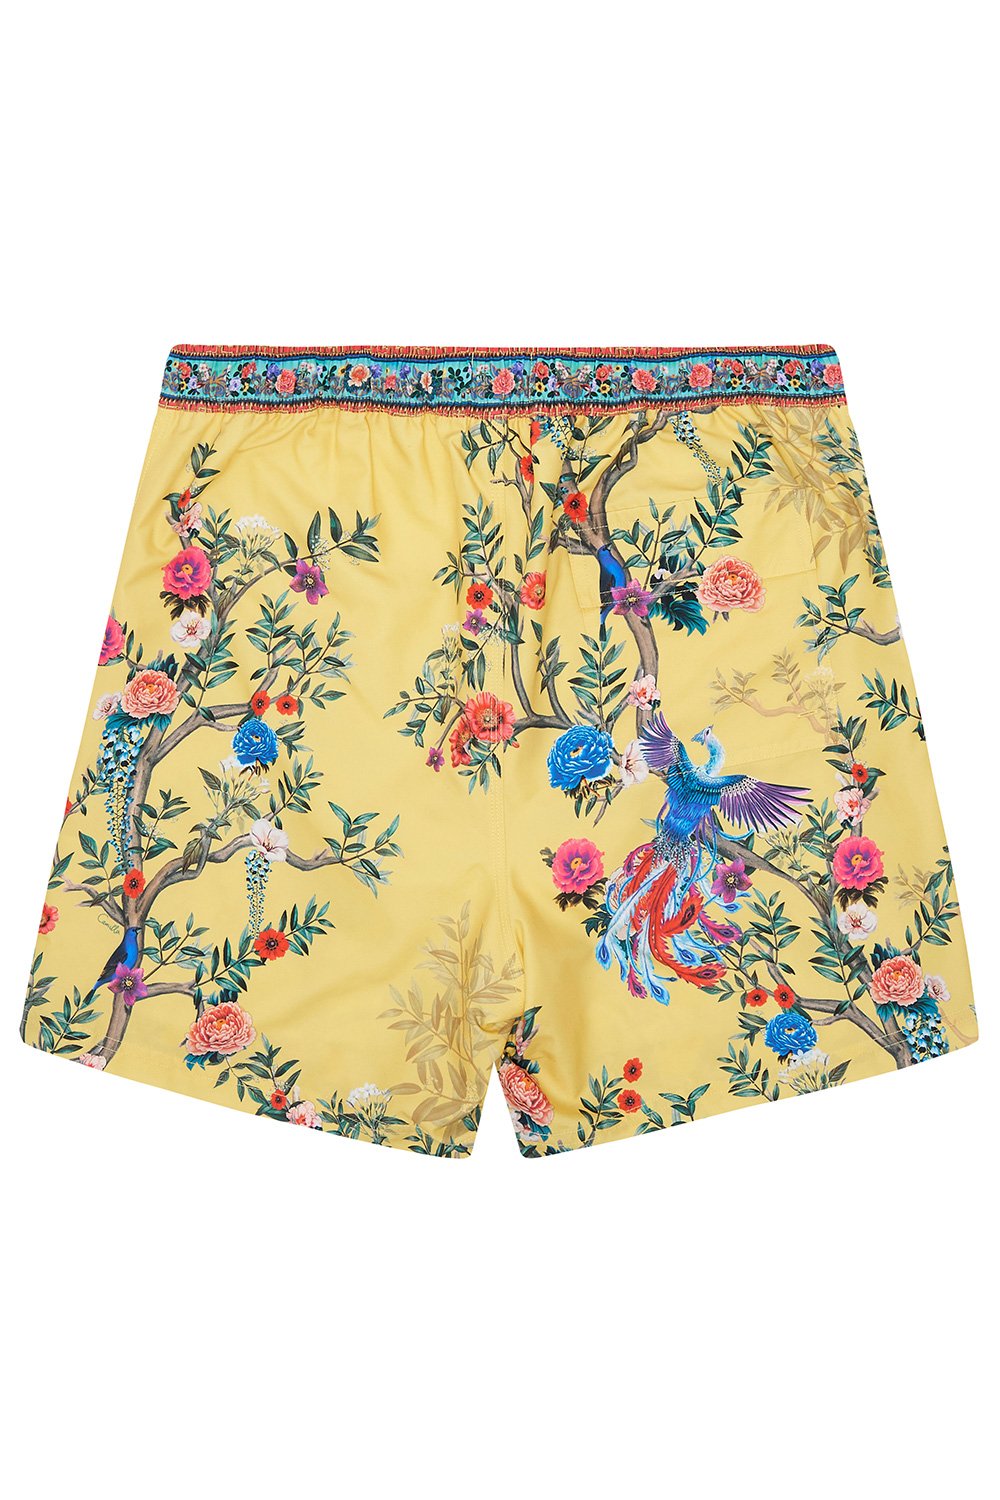 ELASTIC WAIST BOARDSHORT FIT FOR A KING